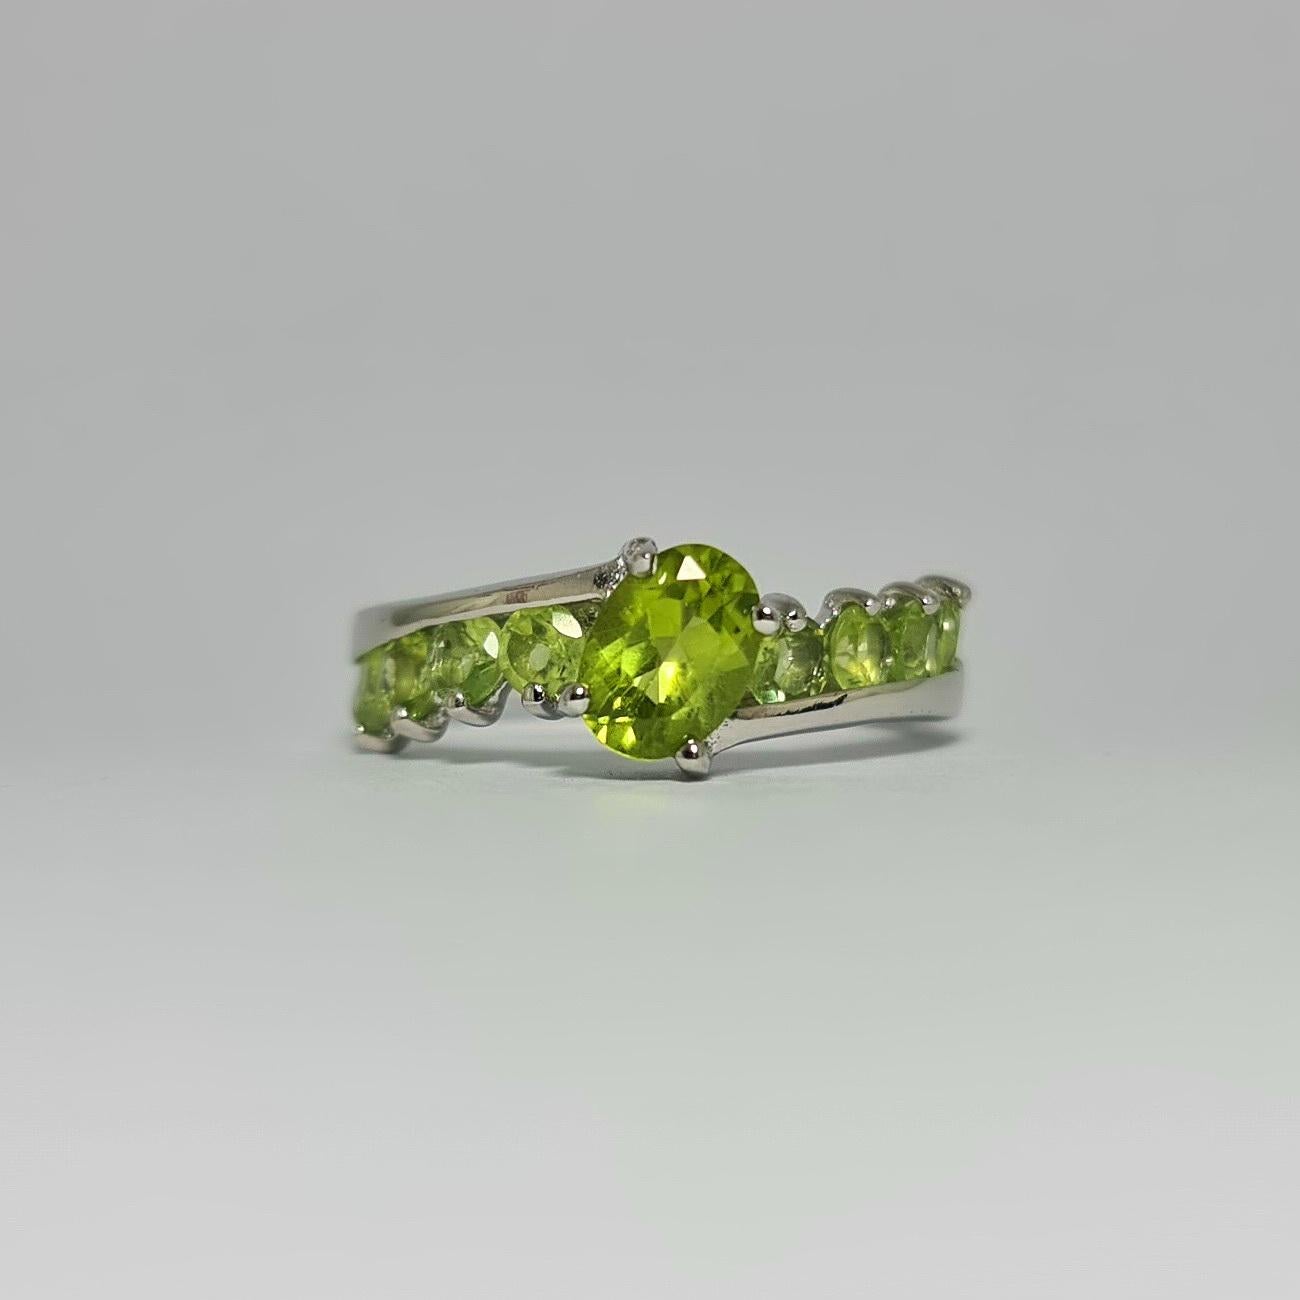 2.7 Cts Natural Untreated  Brazilian Peridot set in .925 Sterling Silver Rhodium Plated Ring 